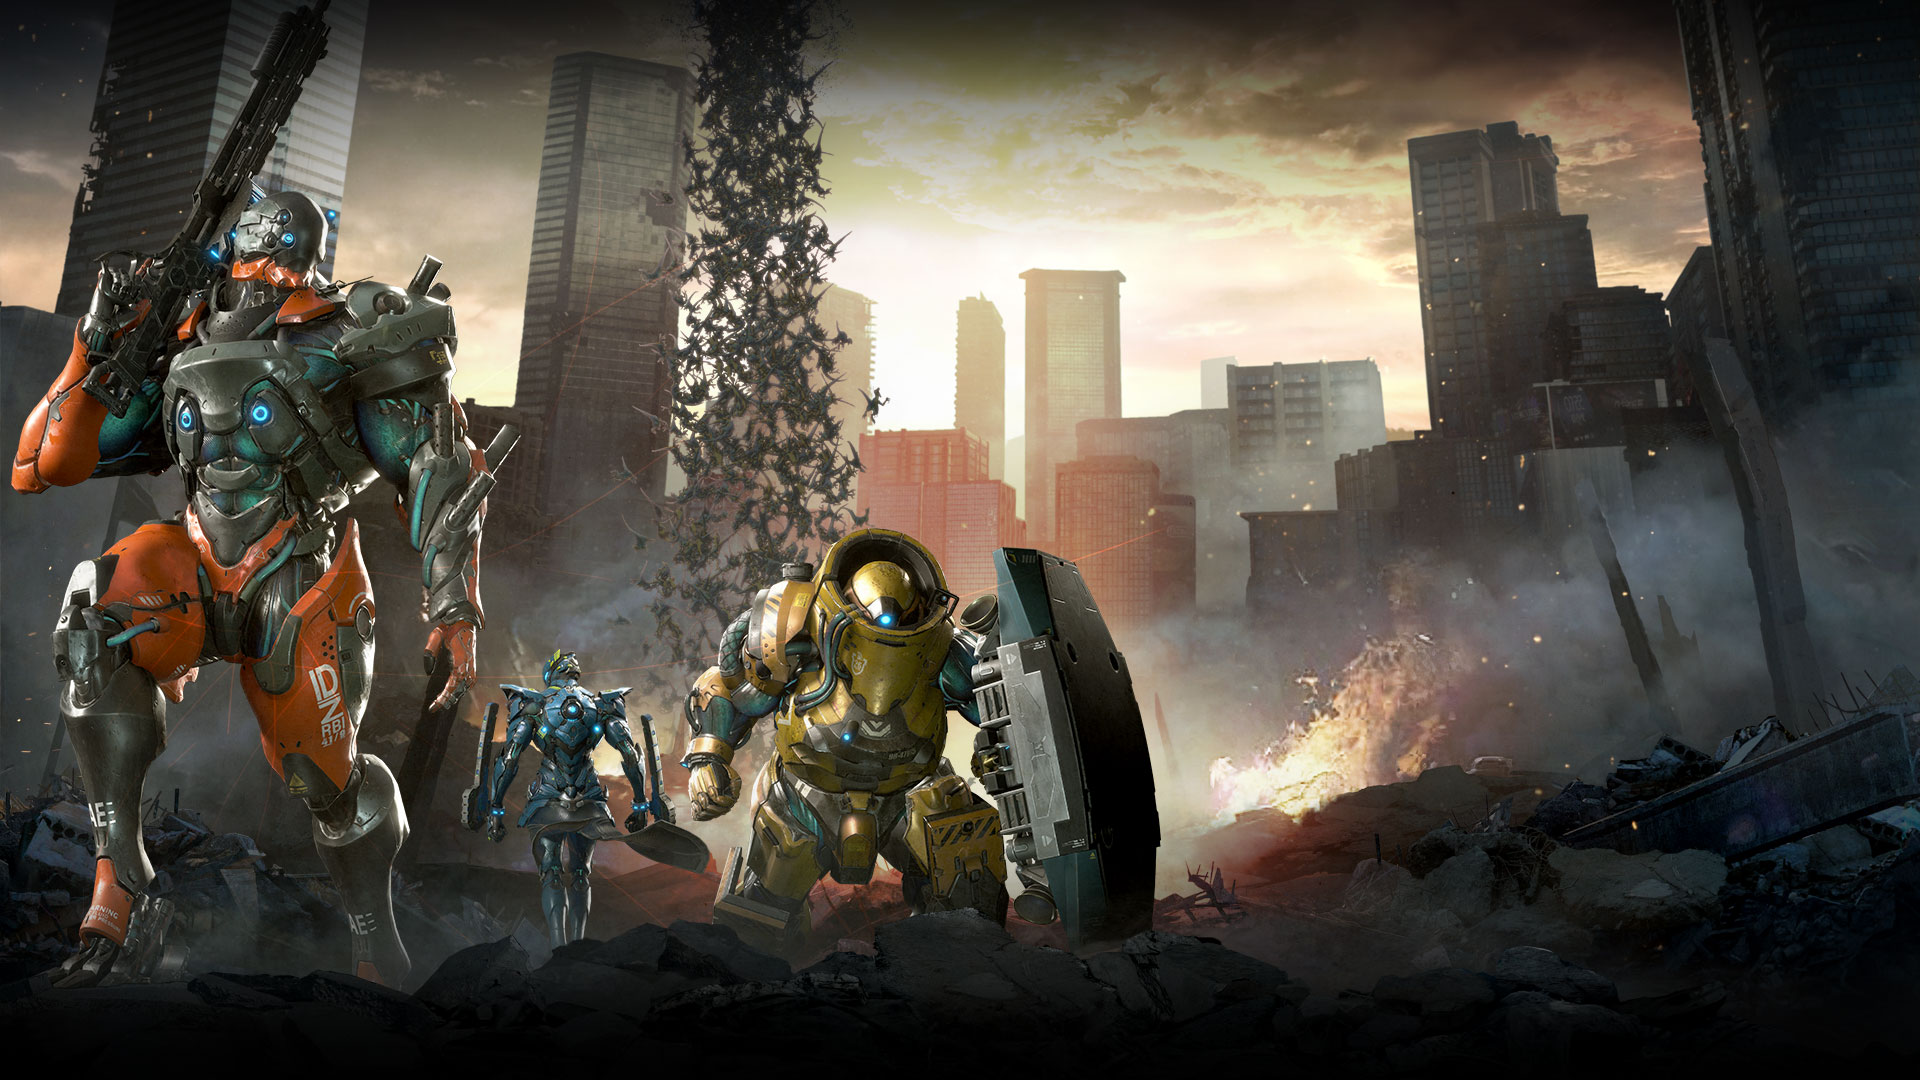 Three mechanised suits stand among urban rubble, dinosaurs cascade from the sky.